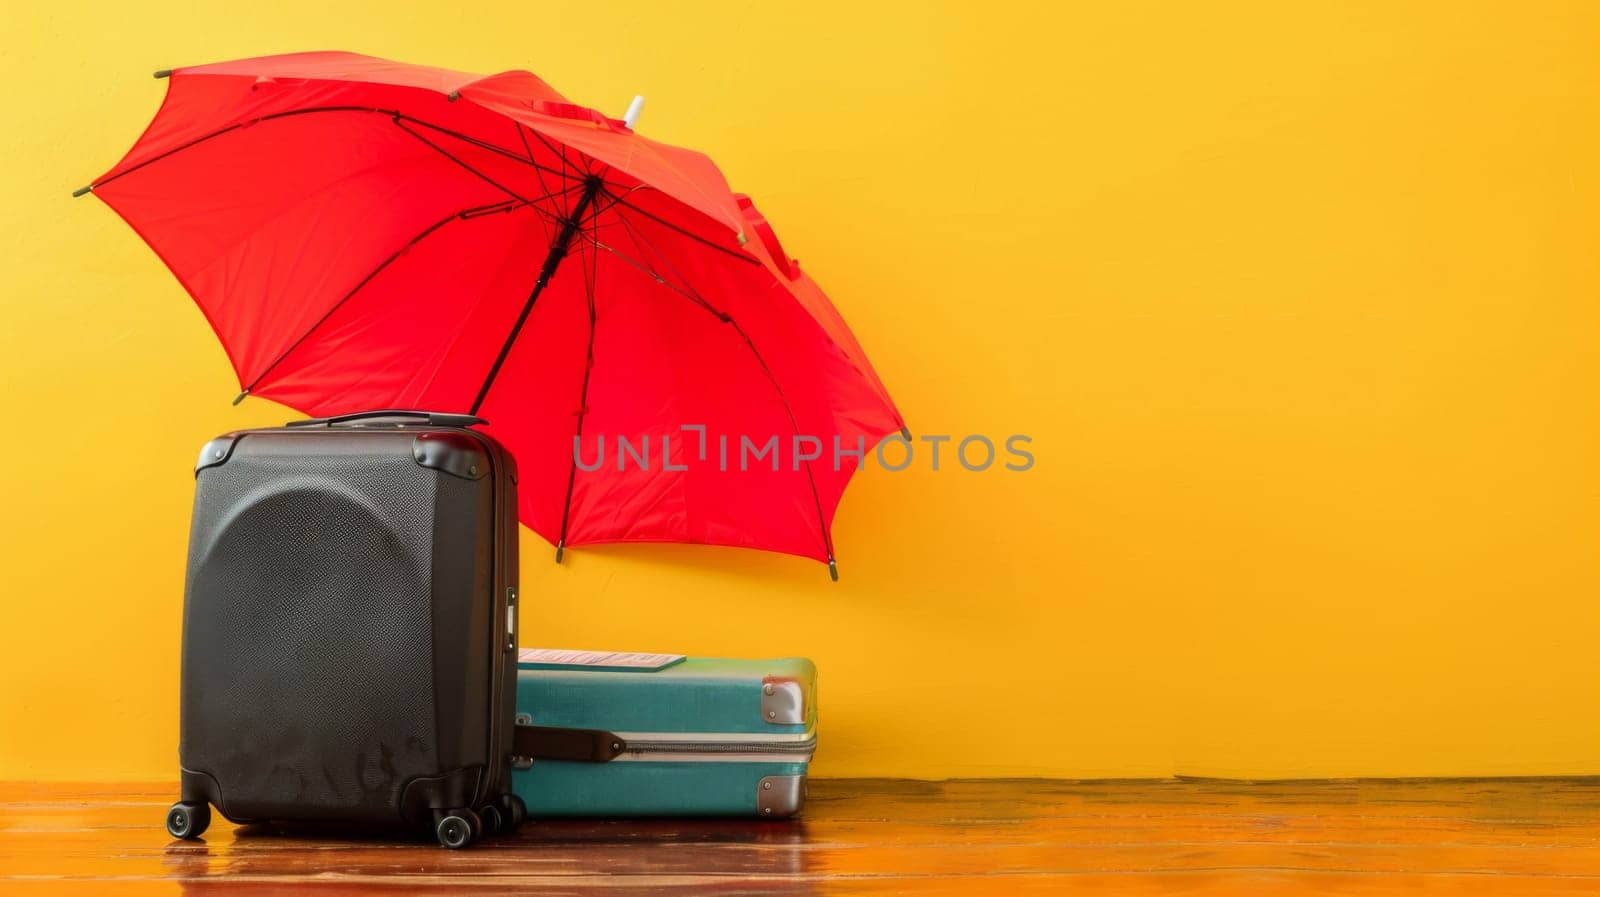 A red umbrella and luggage on a yellow wall, AI by starush